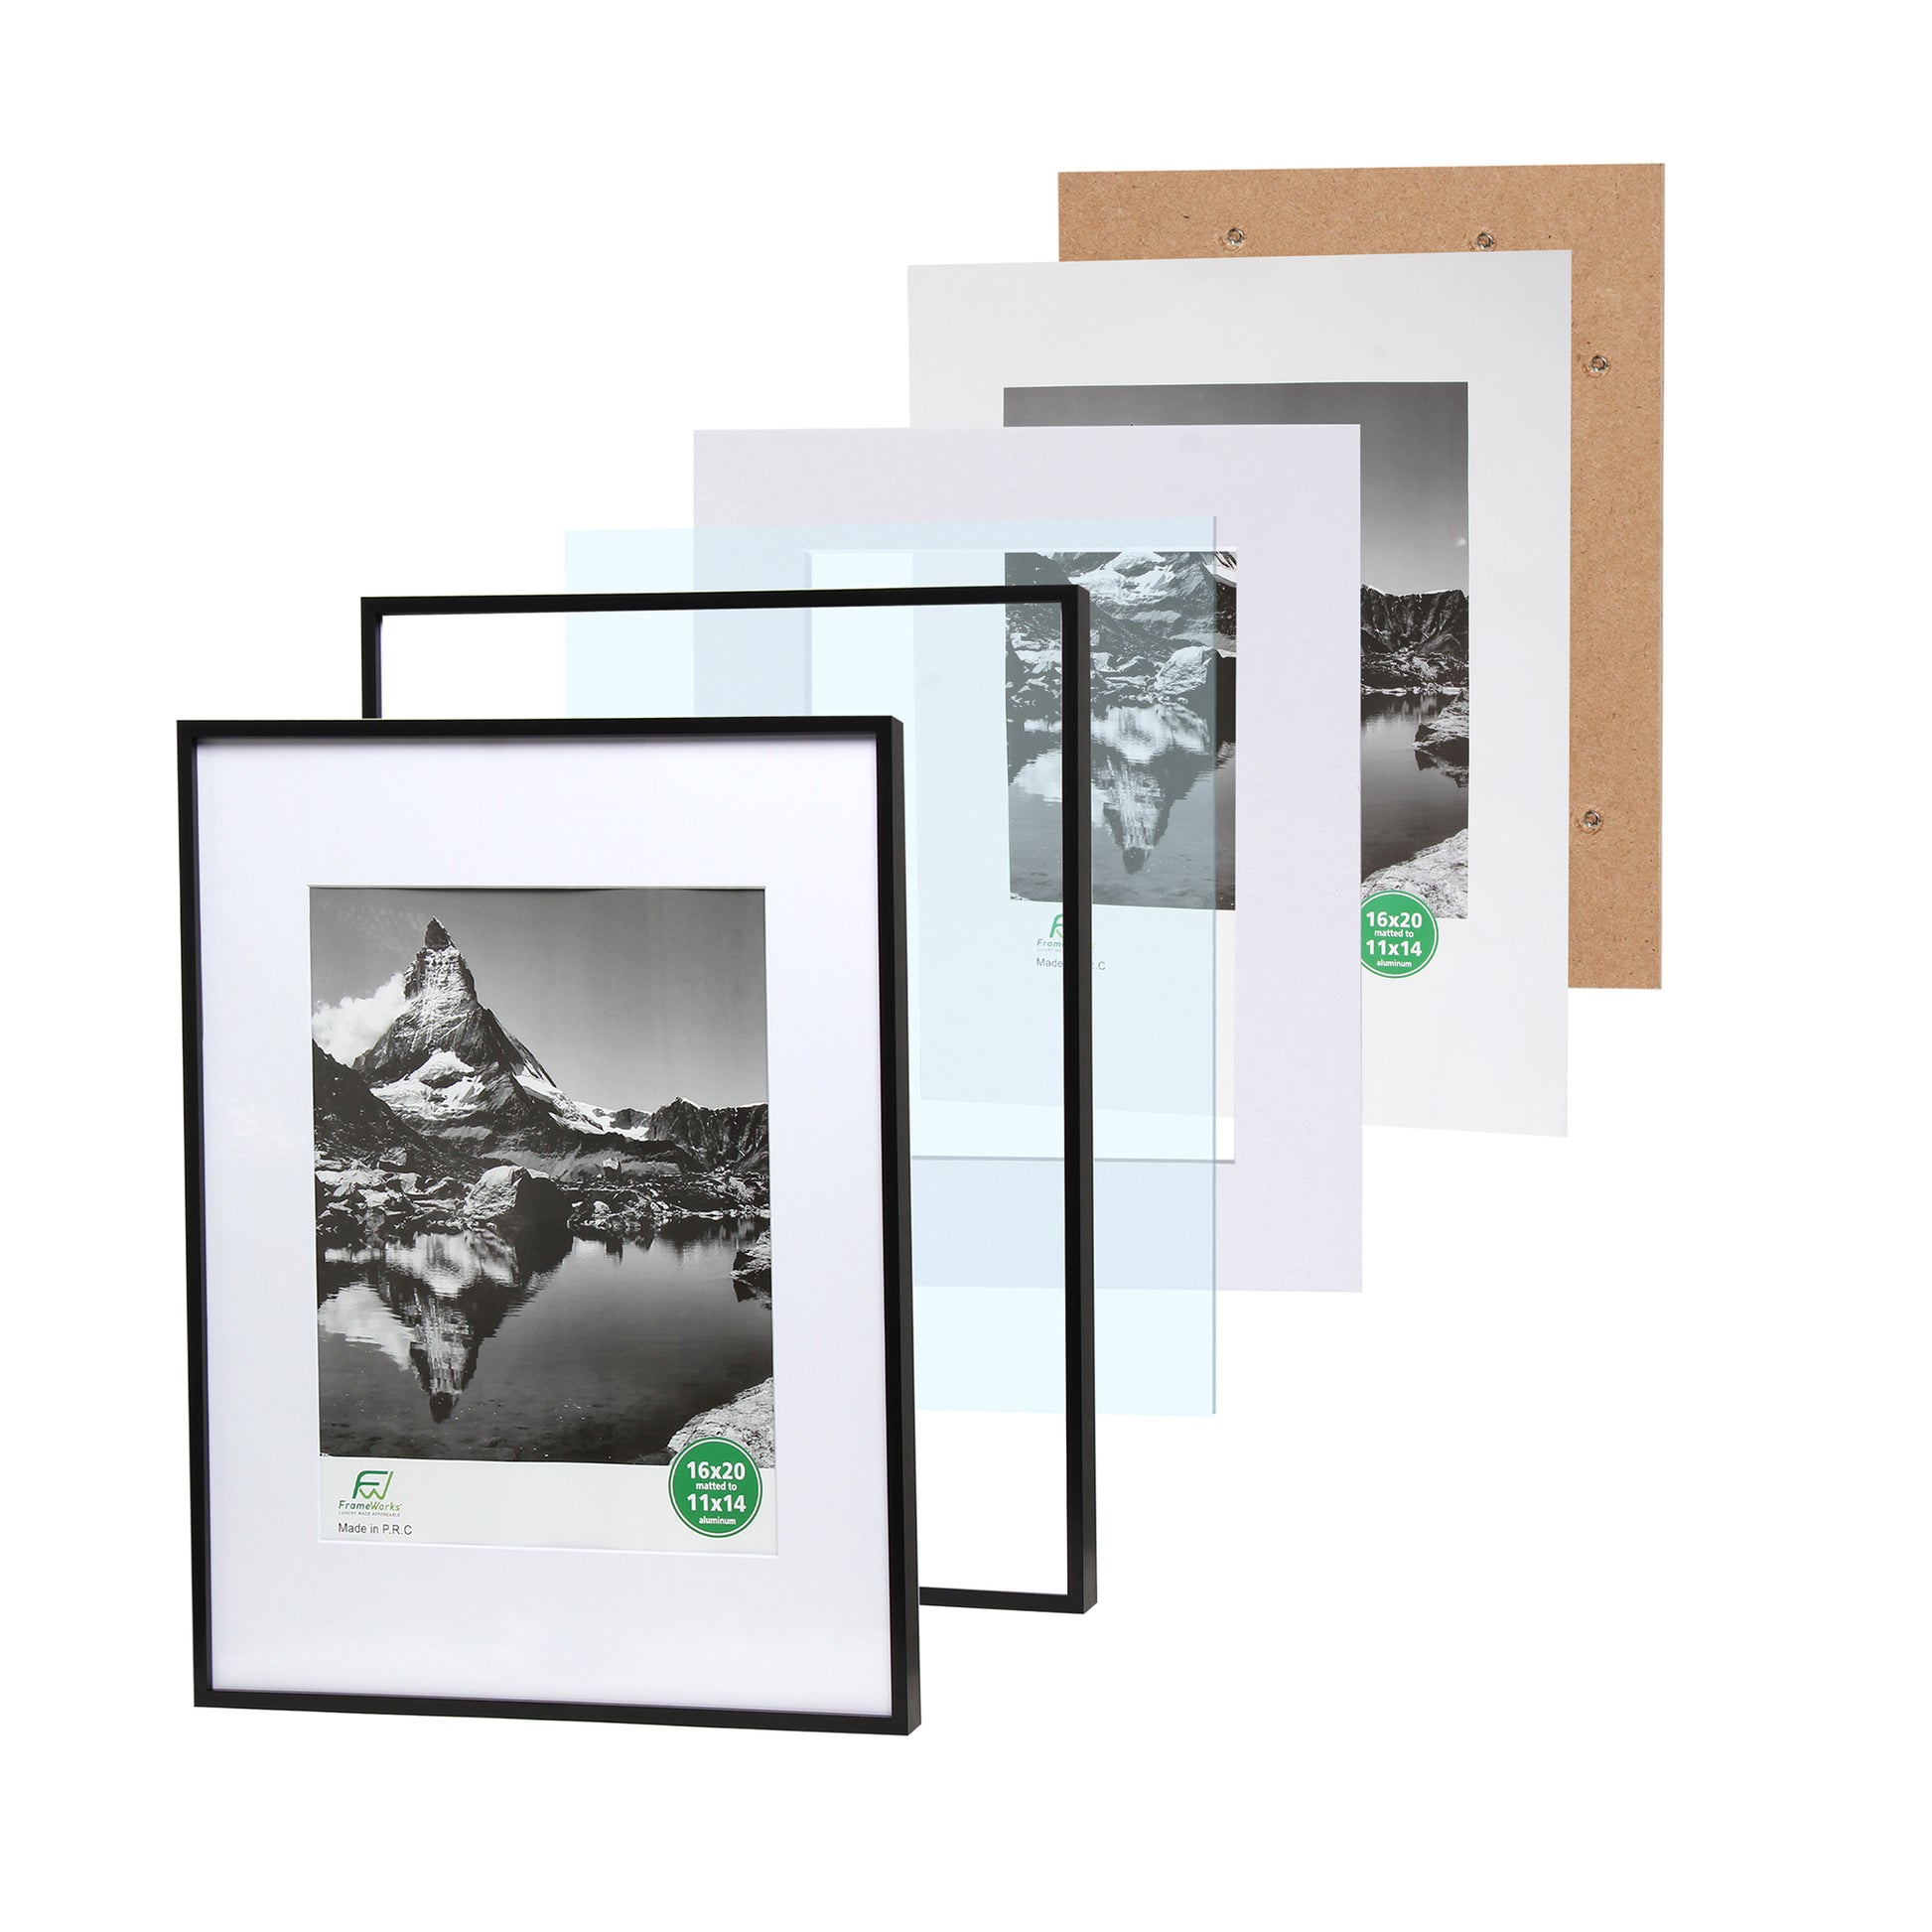  FrameWorks 8”x10” Matted to 5”x7” – Deluxe Black